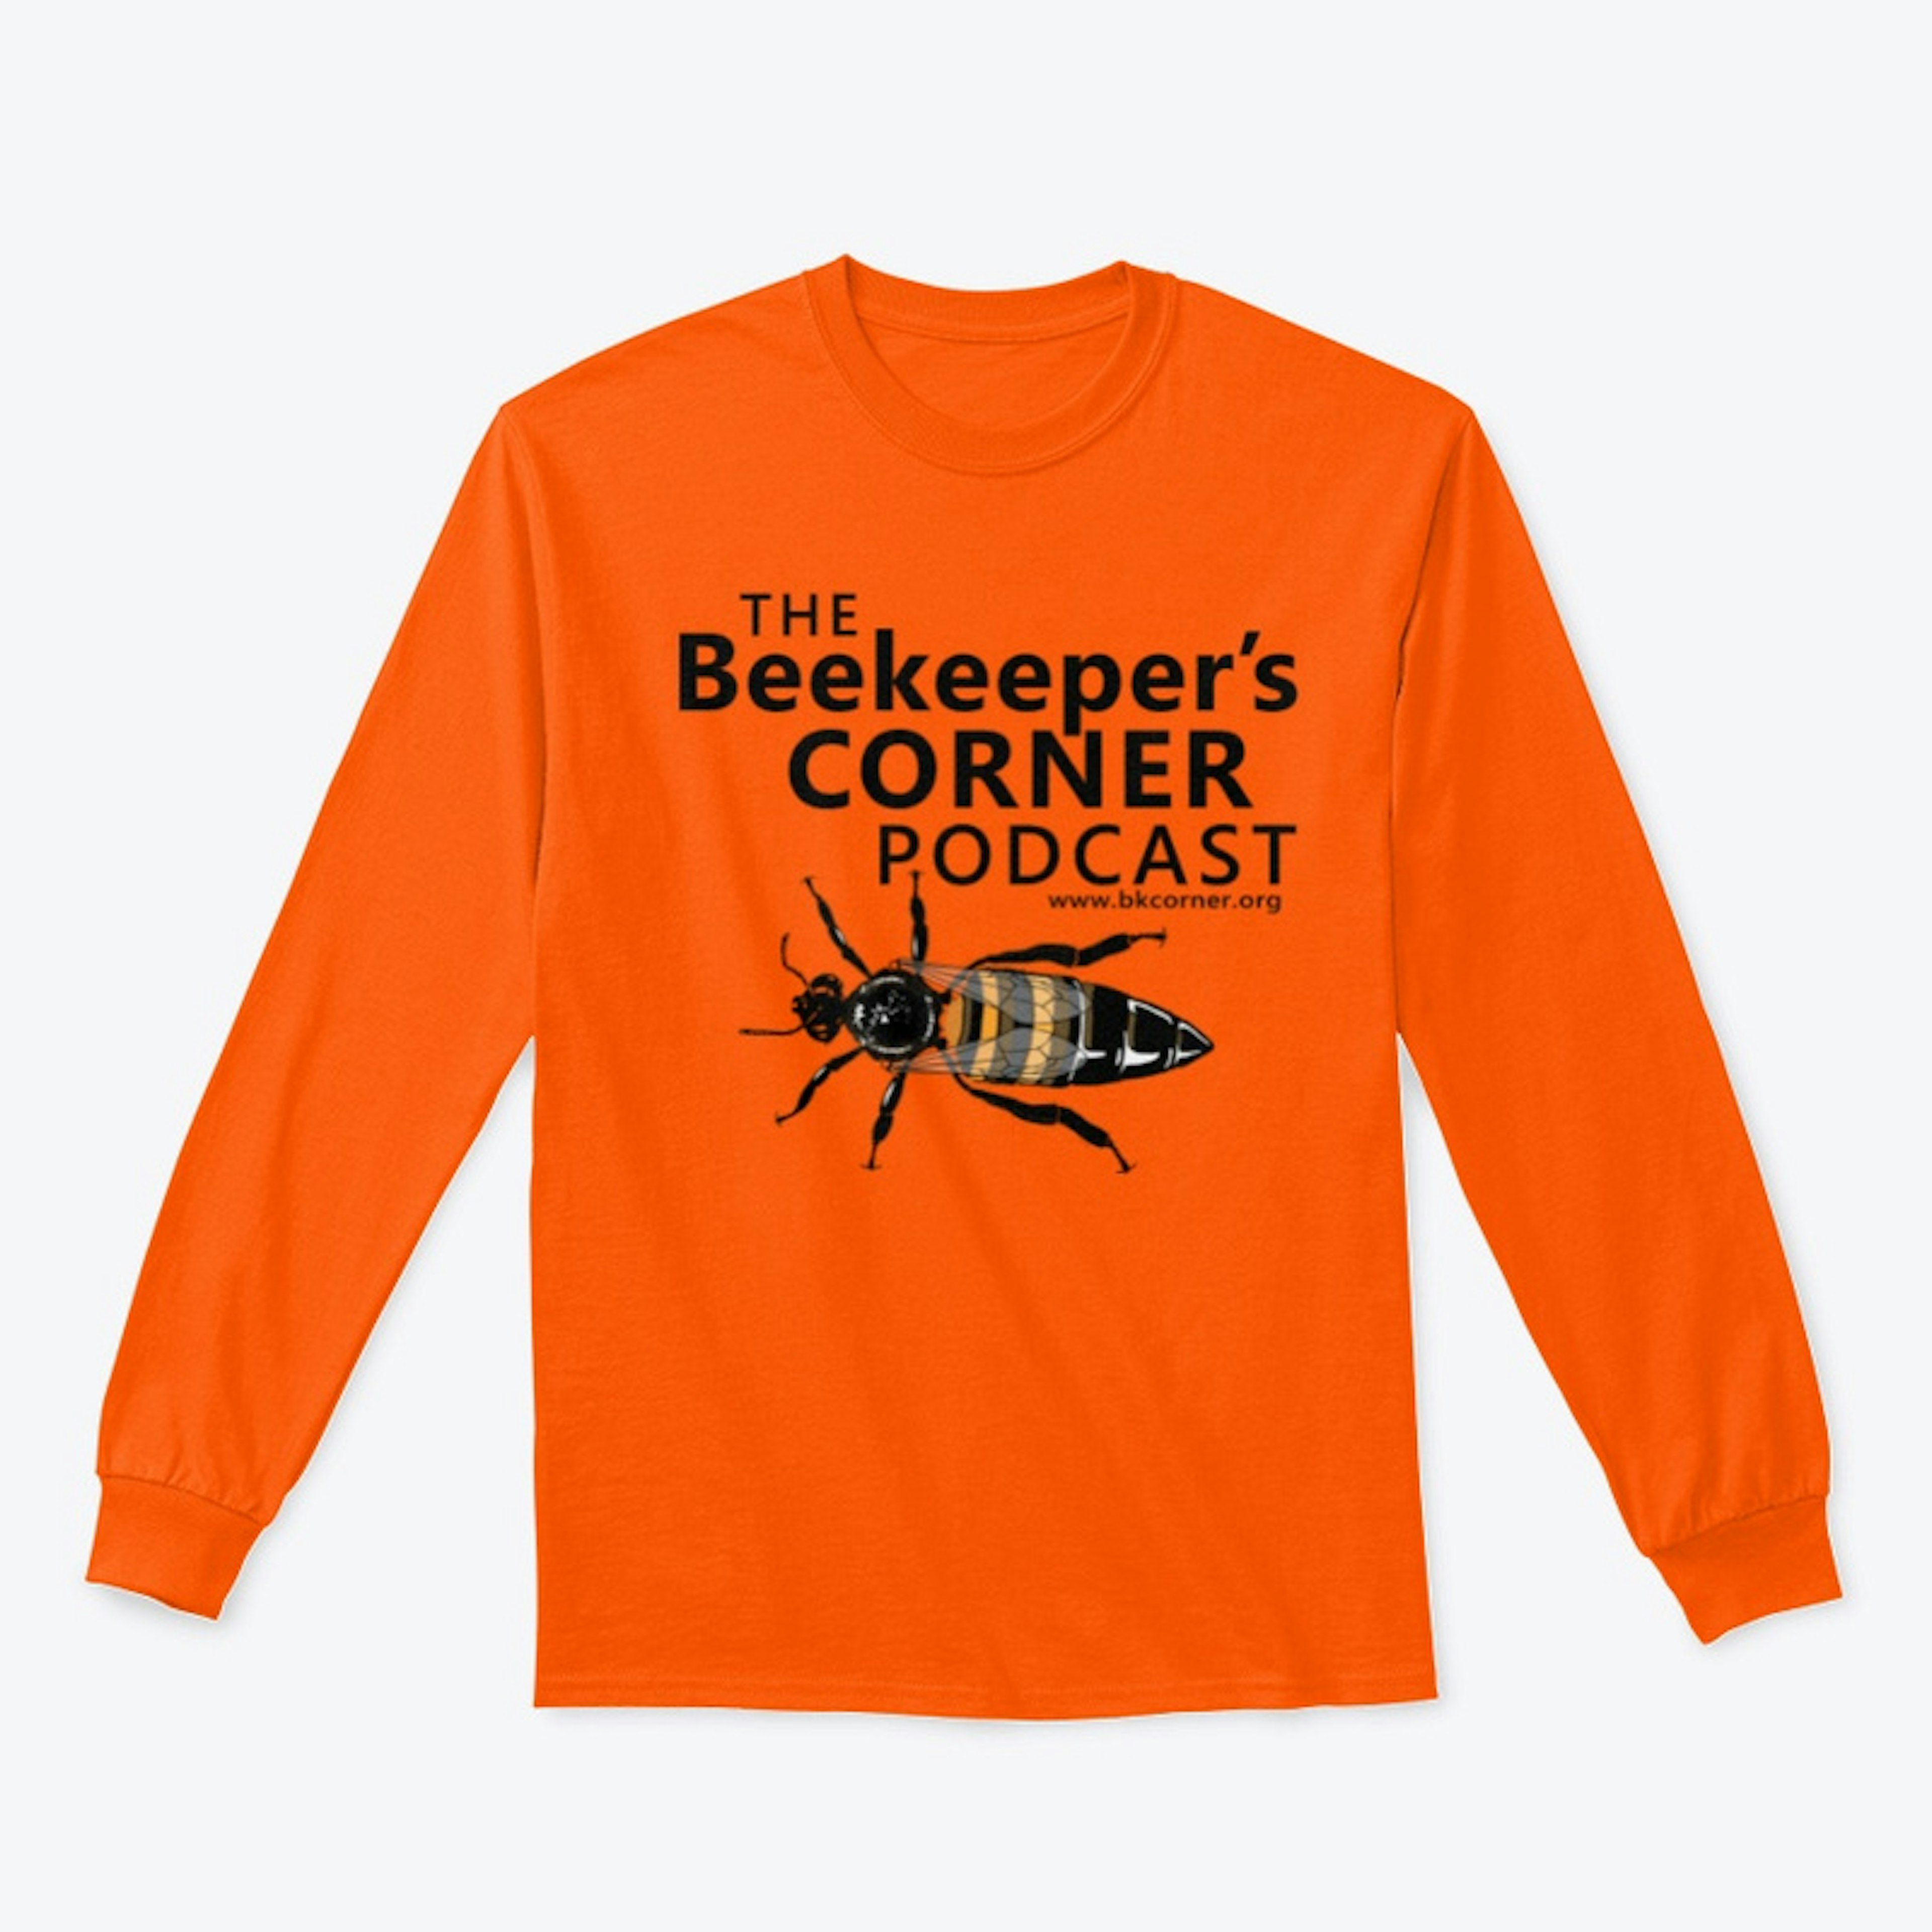 The Beekeepers Corner Podcast